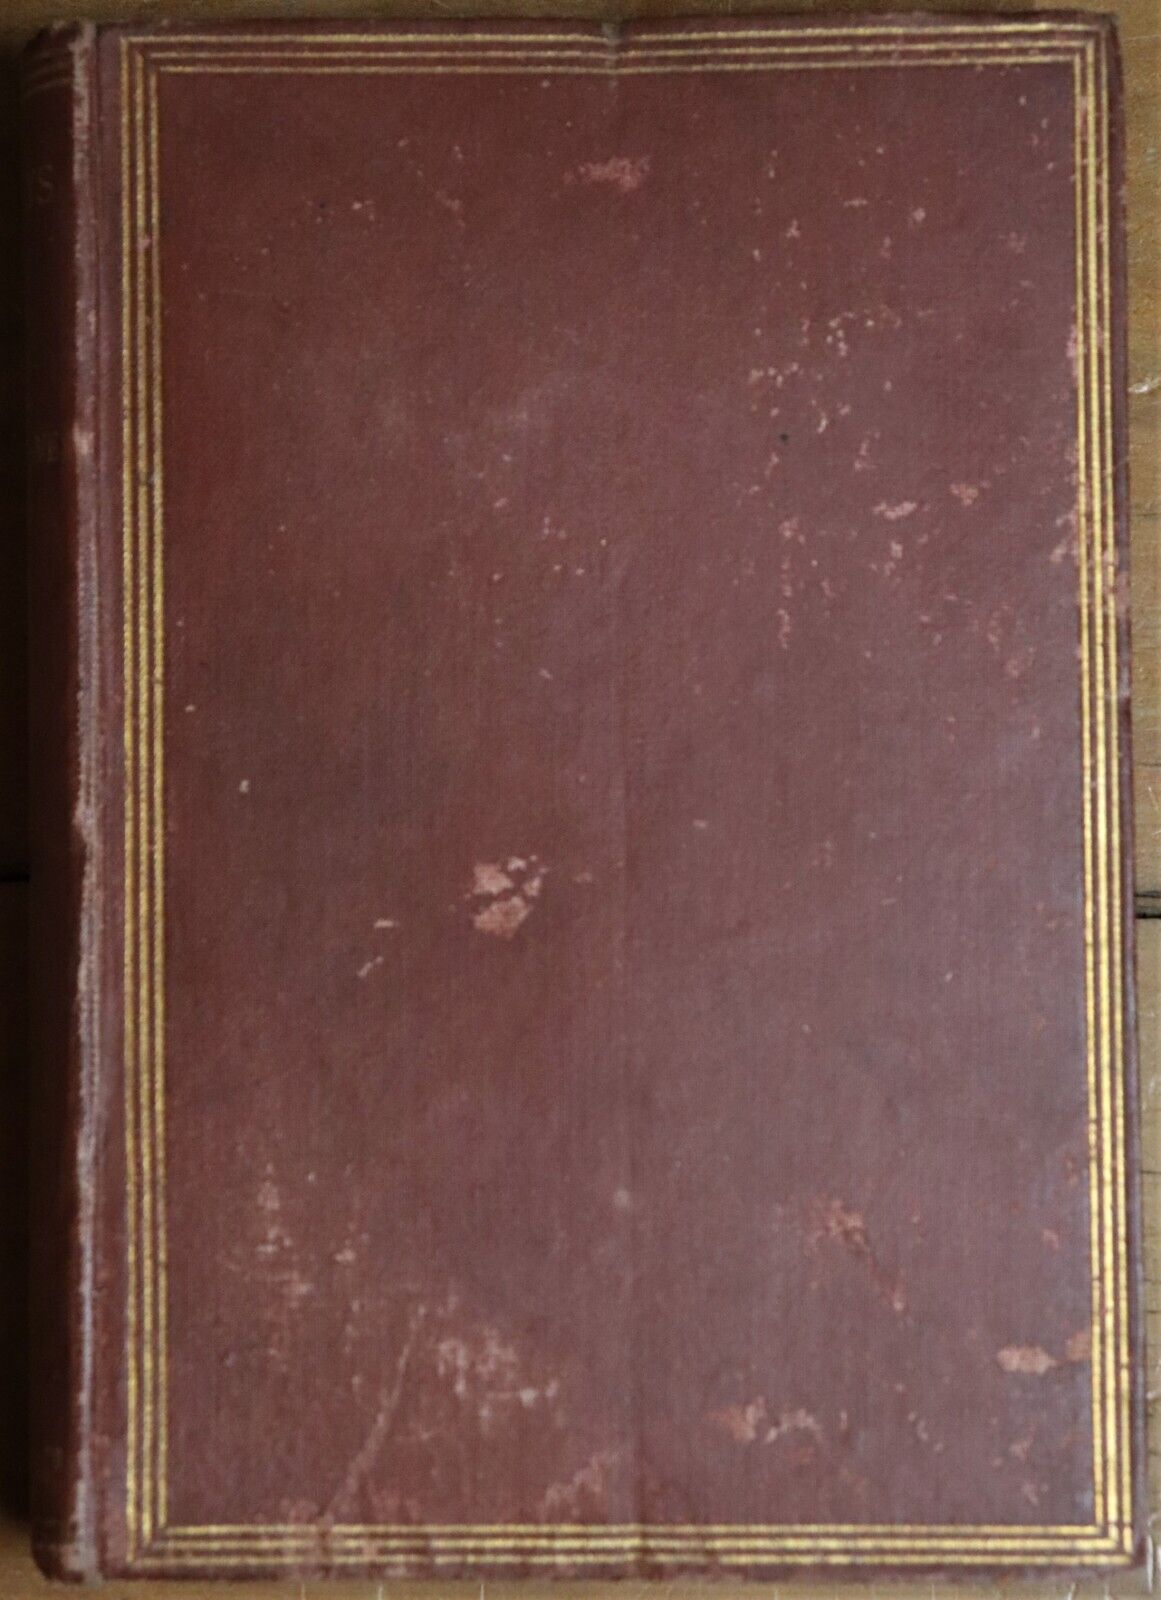 1866 Essays On Art by Francis Turner Palgrave Antiquarian Art Book